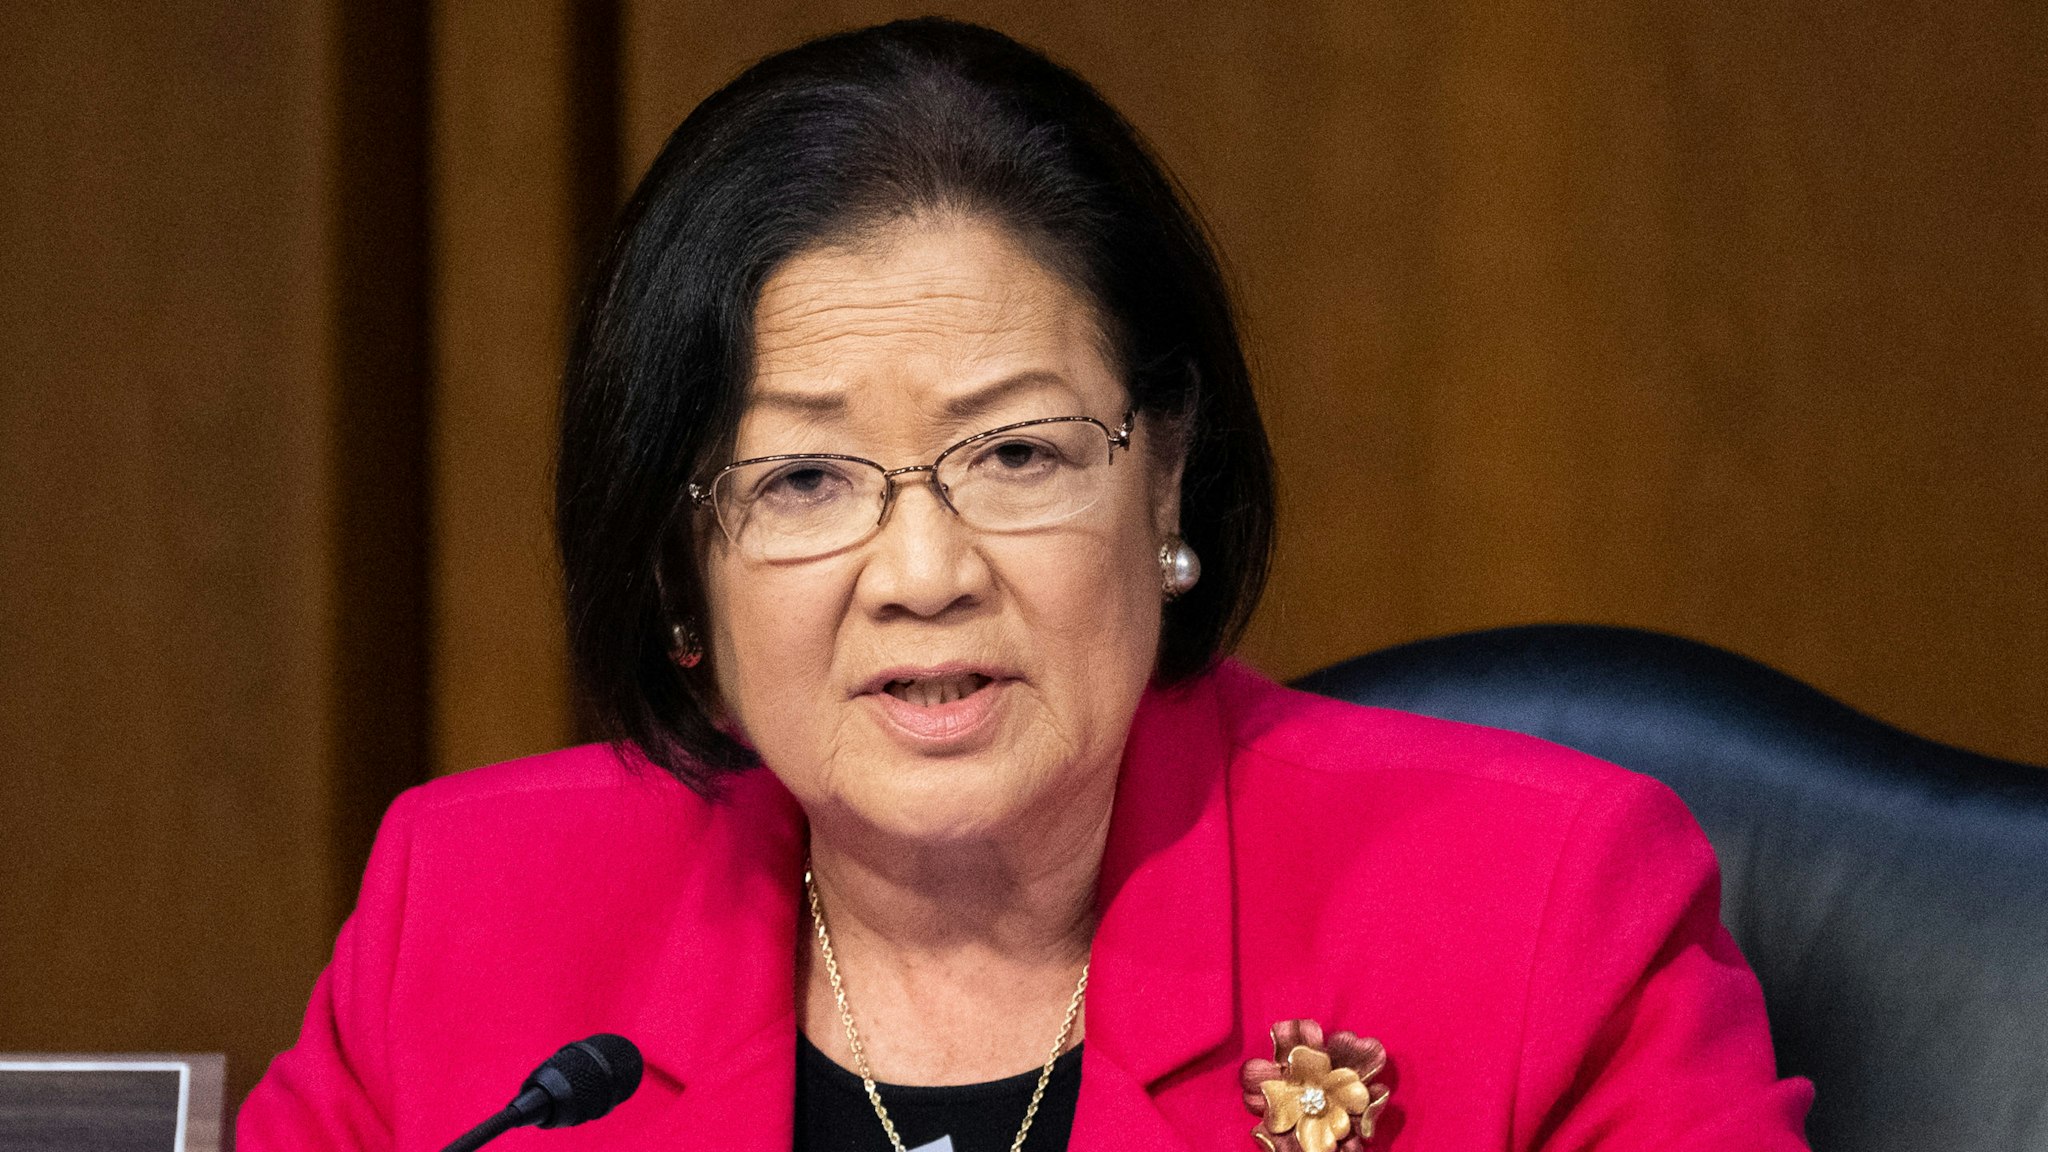 WASHINGTON, DC, UNITED STATES, DECEMBER 11, 2019: Senator Mazie Hirono (D-HI) speaks during the Senate Judiciary Committee Hearing on the Department of Justice (DOJ) Inspector General's report regarding the investigation into DOJ and FBIs work regarding the 2016 presidential election.